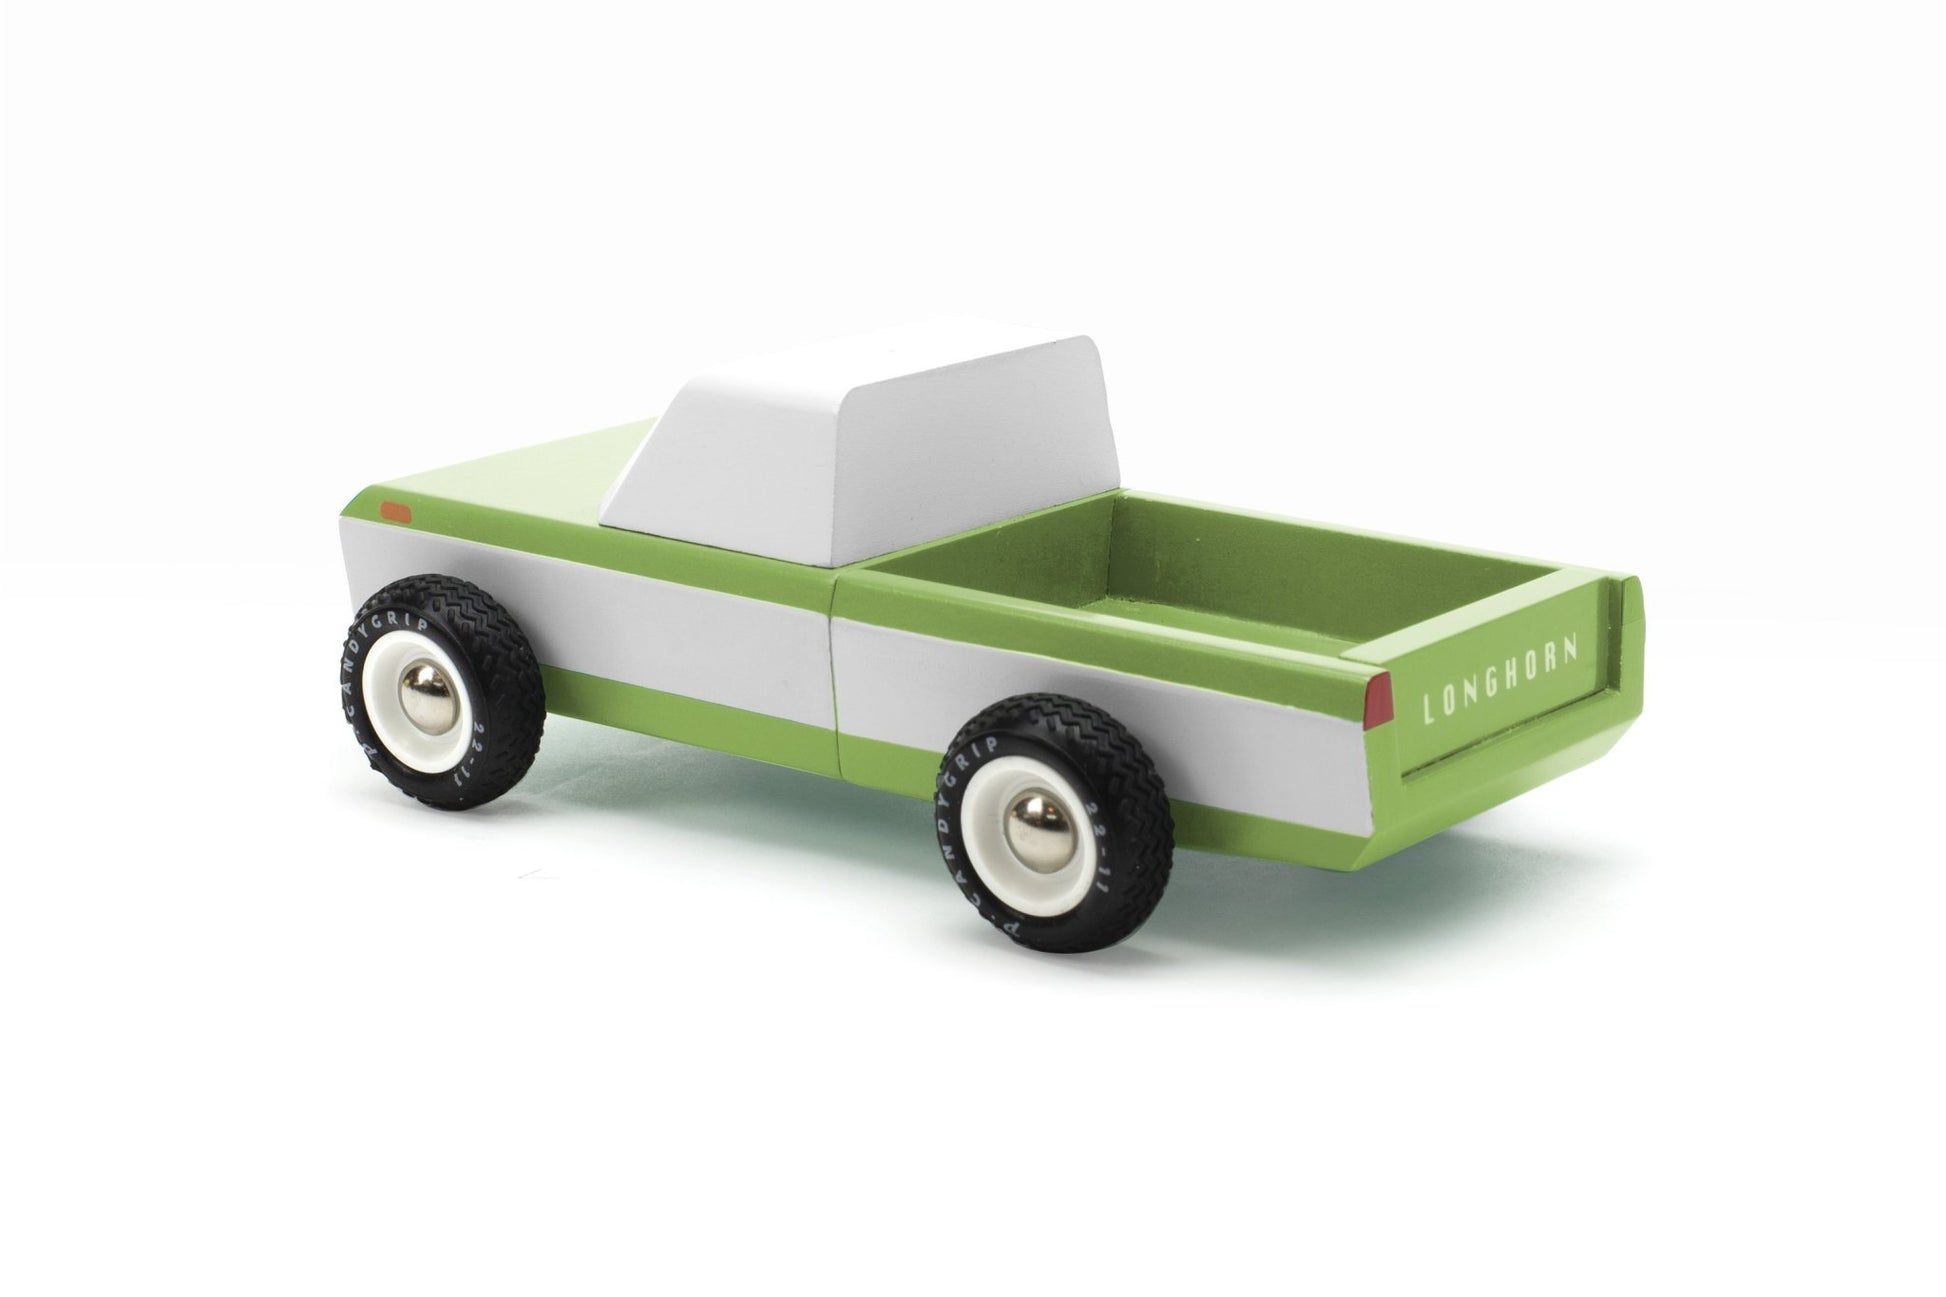 Candylab Toys Olive Longhorn - Modern Vintage Pickup Truck - Wood Wood Toys Canada's Favourite Montessori Toy Store